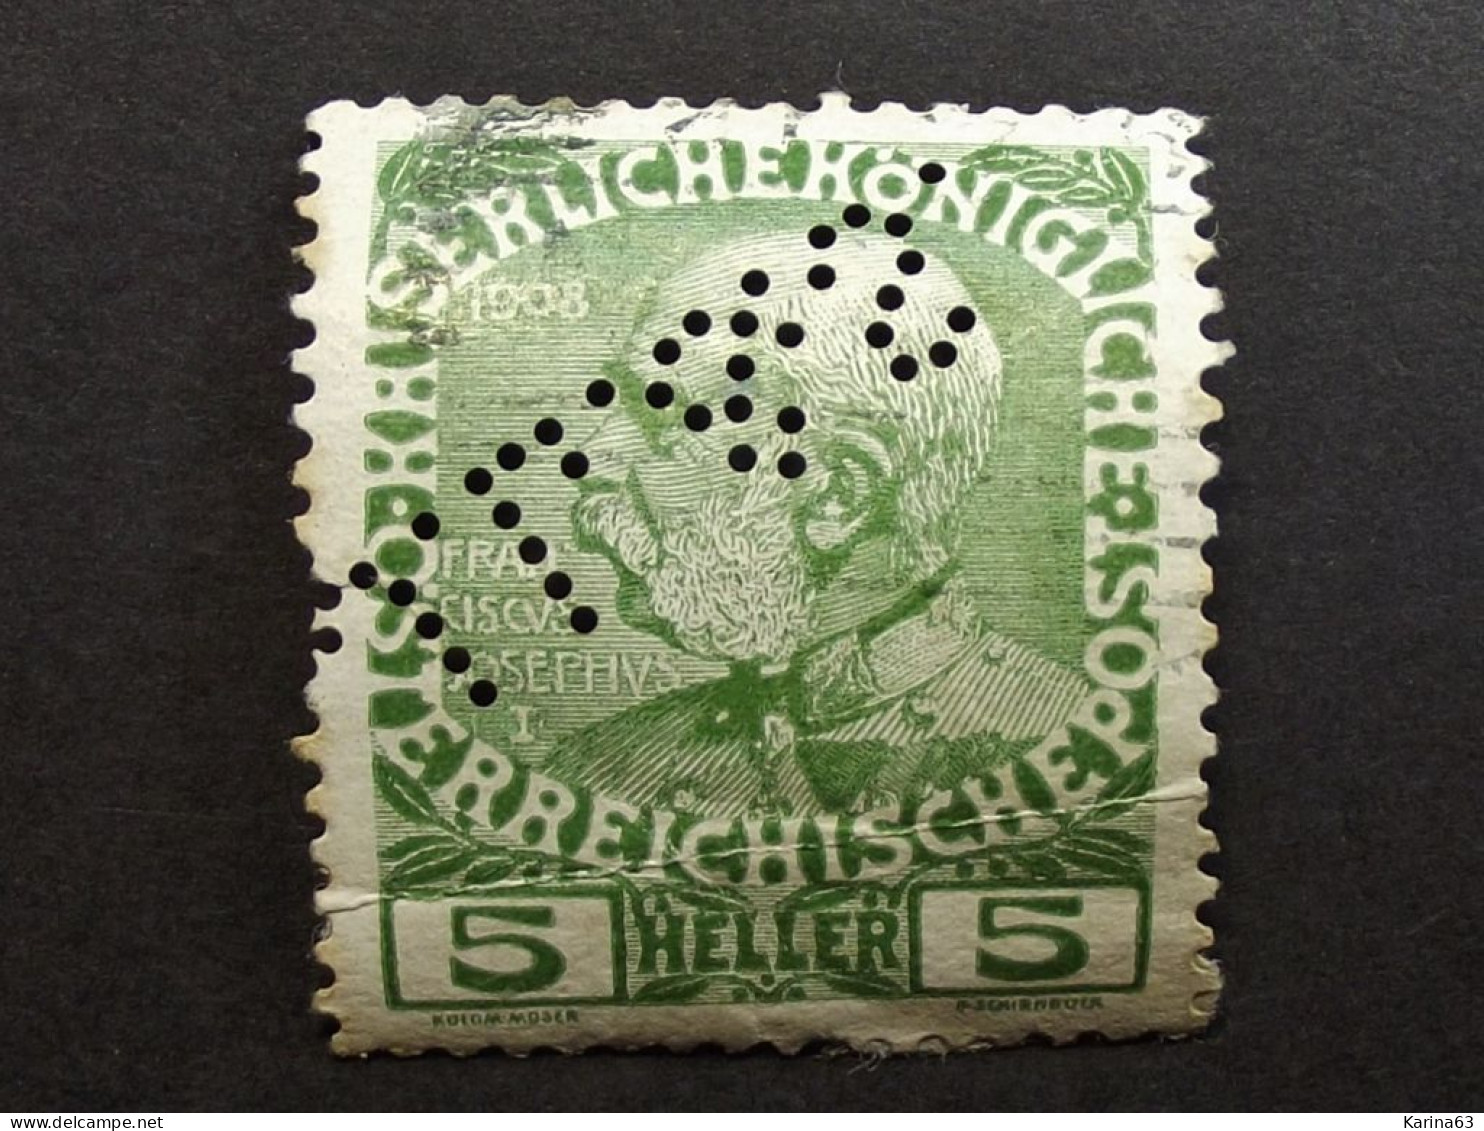 Österreich - Autriche - Oostenrijk - Perfin - Perforé - Lochung  J.L.&S.  - Cancelled - Used Stamps